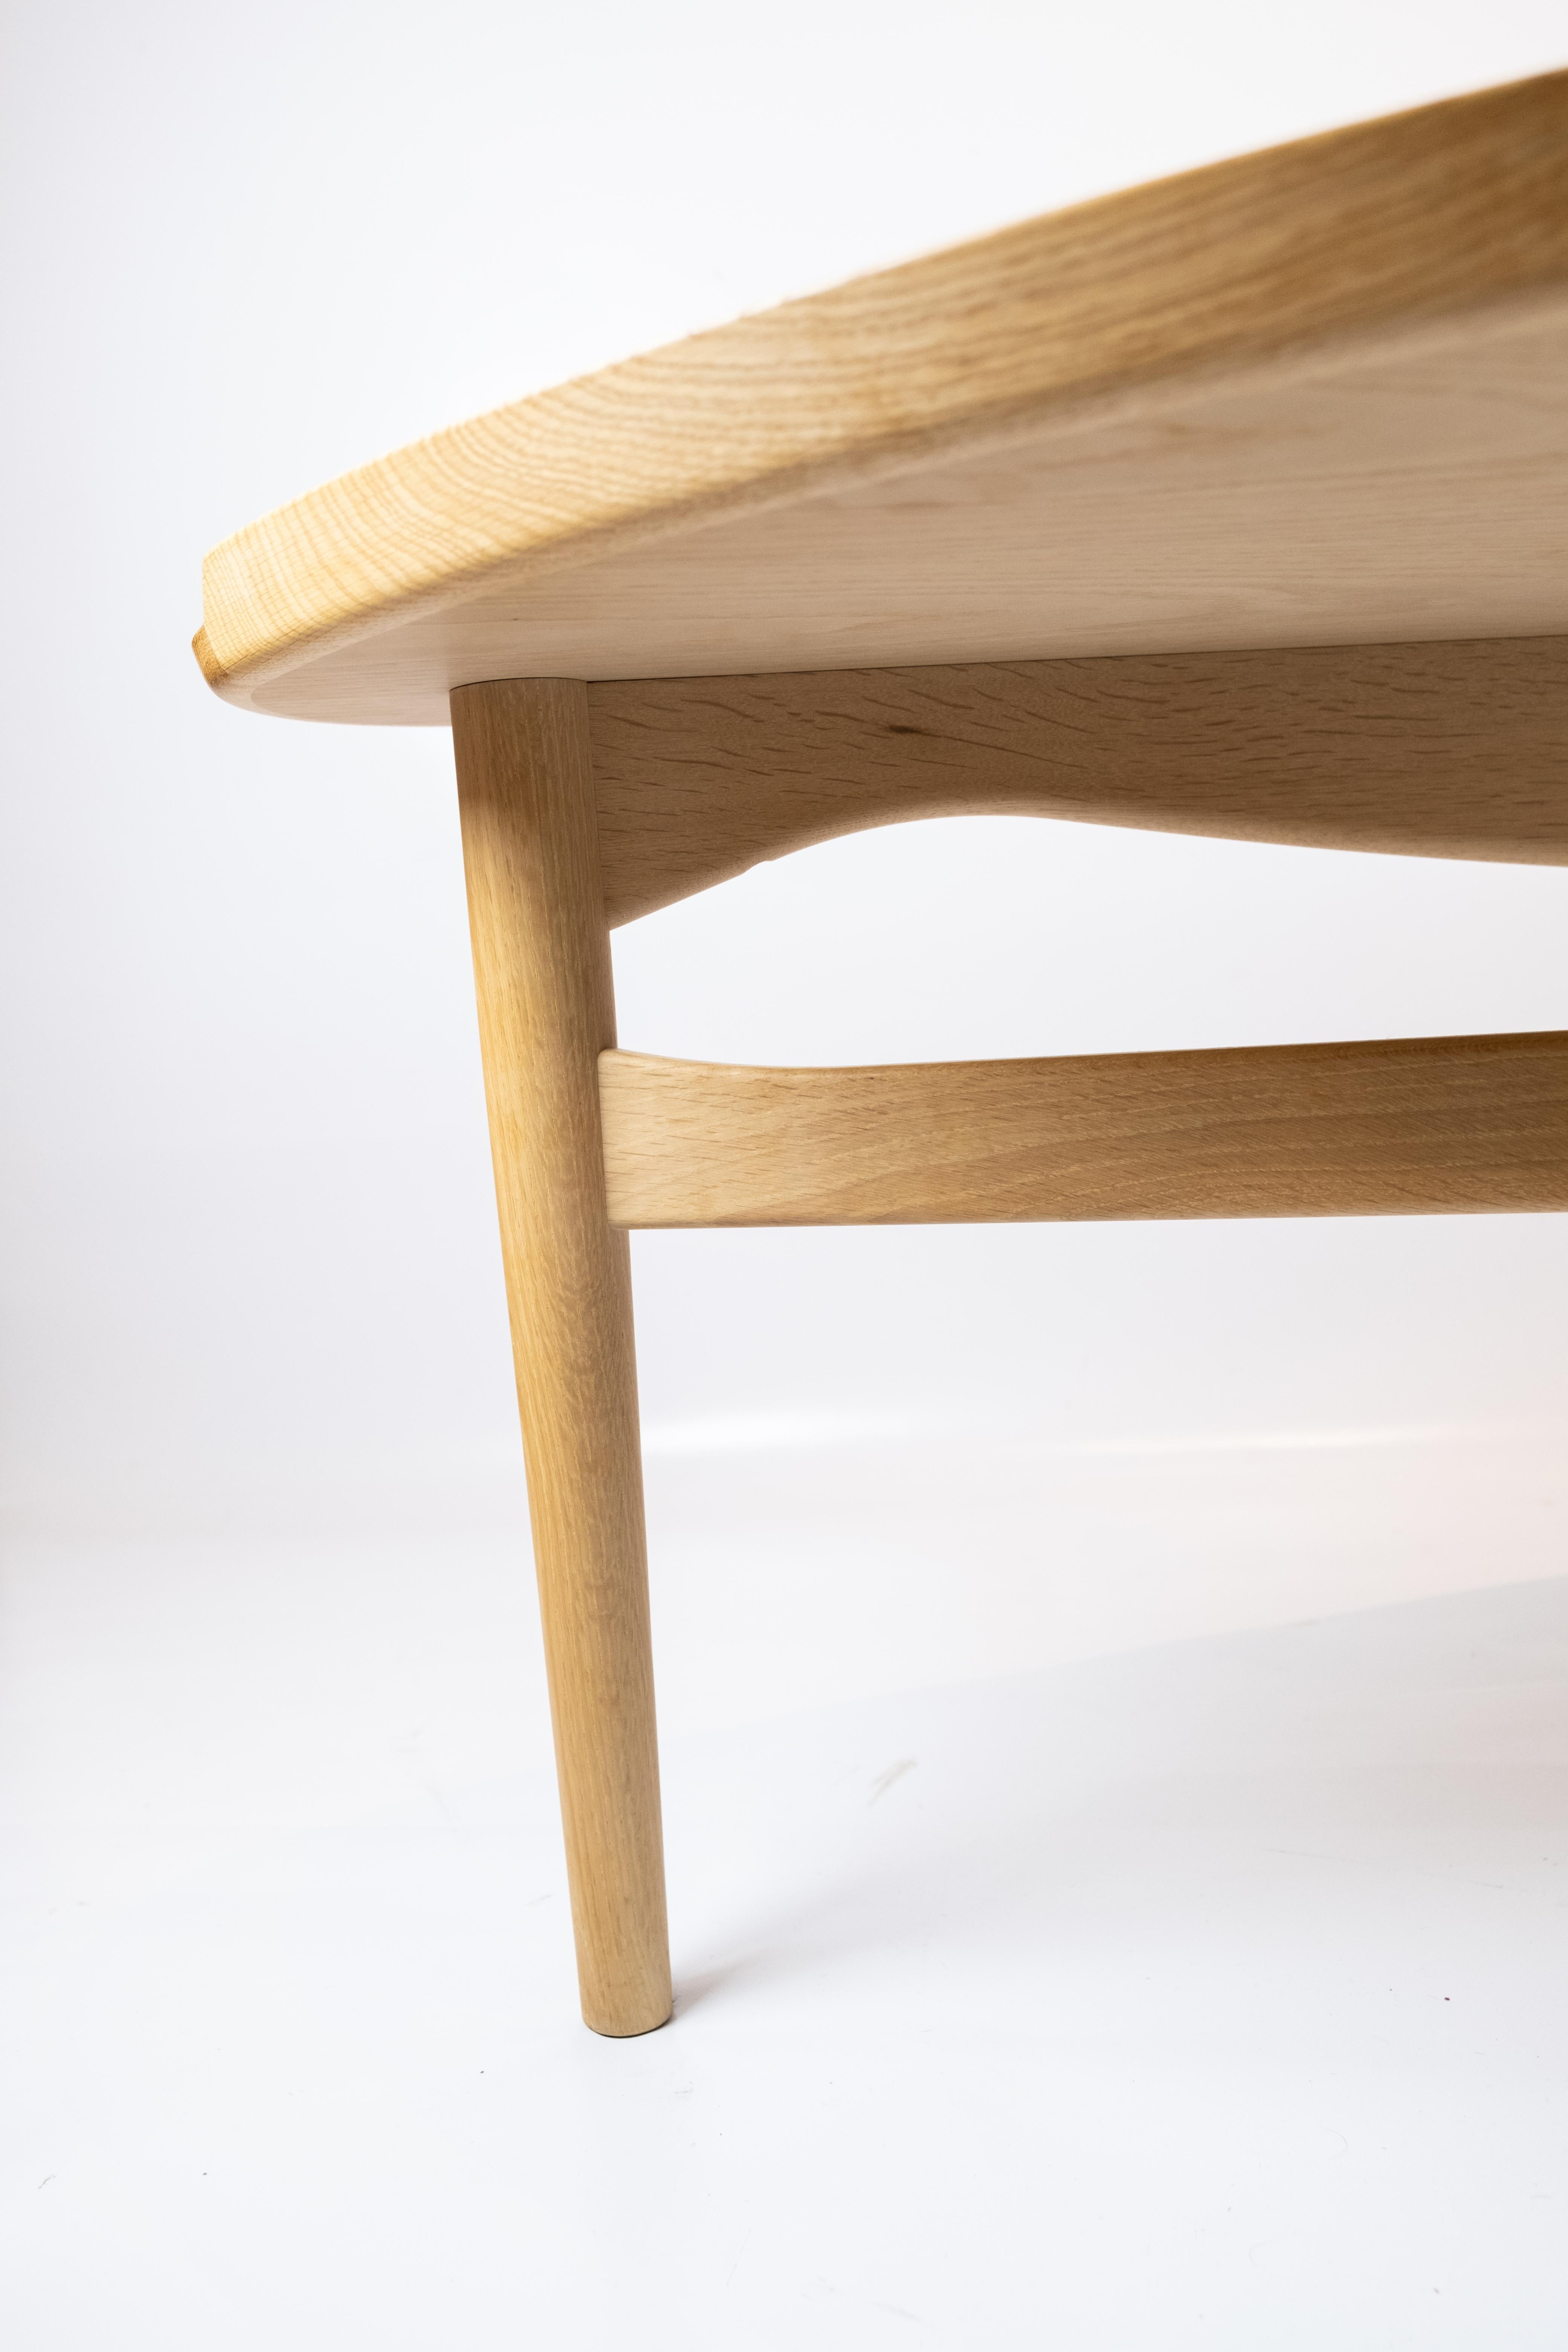 Mid-20th Century Cocktail Table of Oak and White Laminate Designed by Finn Juhl in 1951